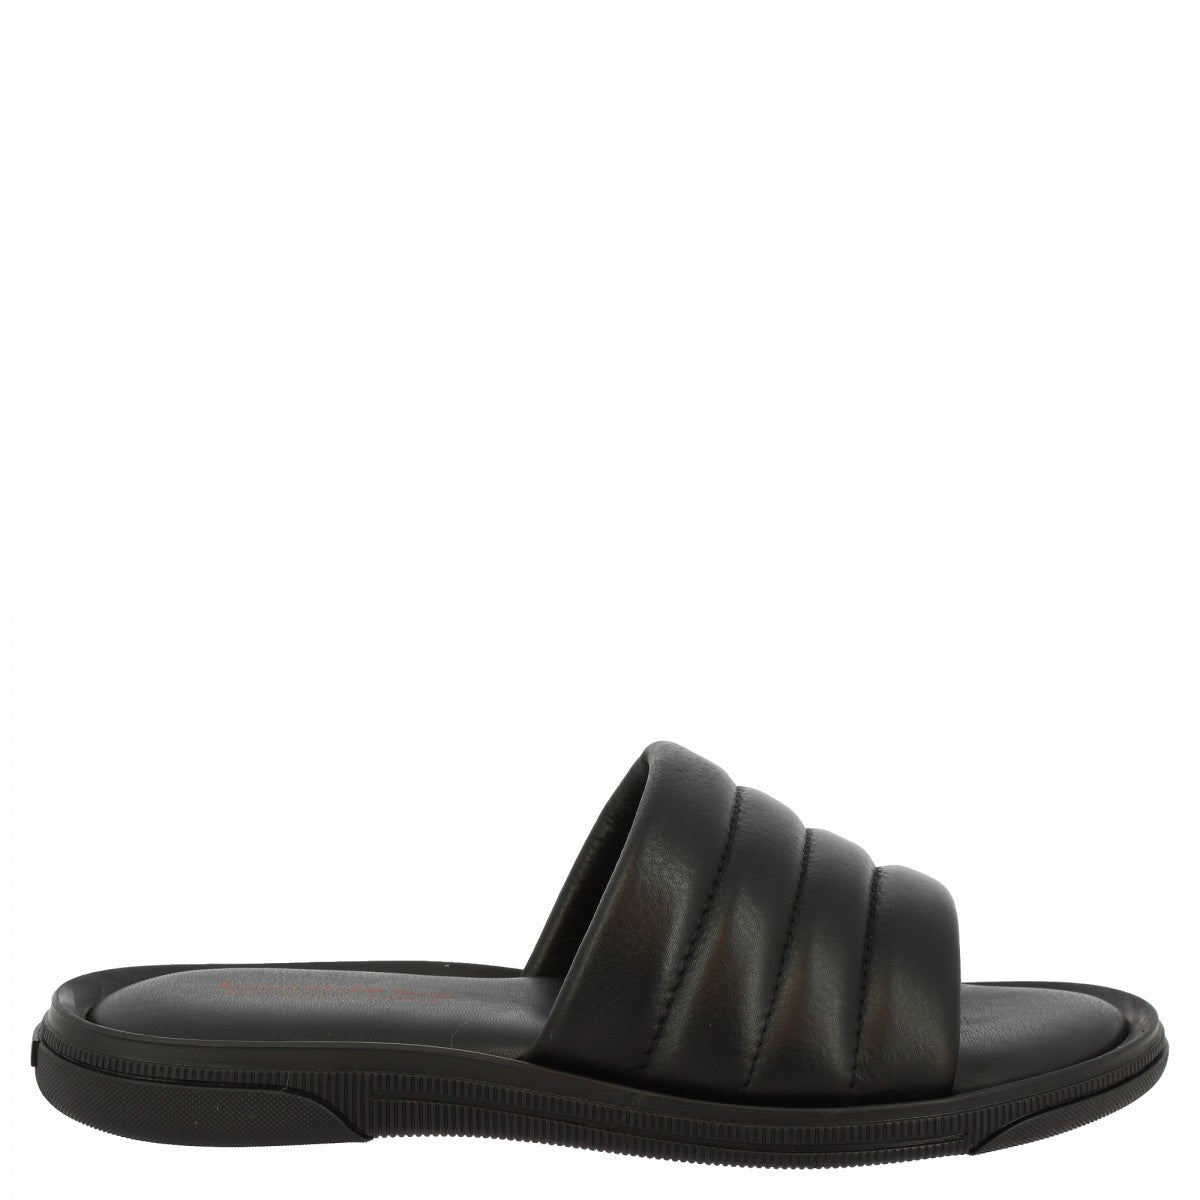 Men's slipper sandals with wide band handmade in black calf leather